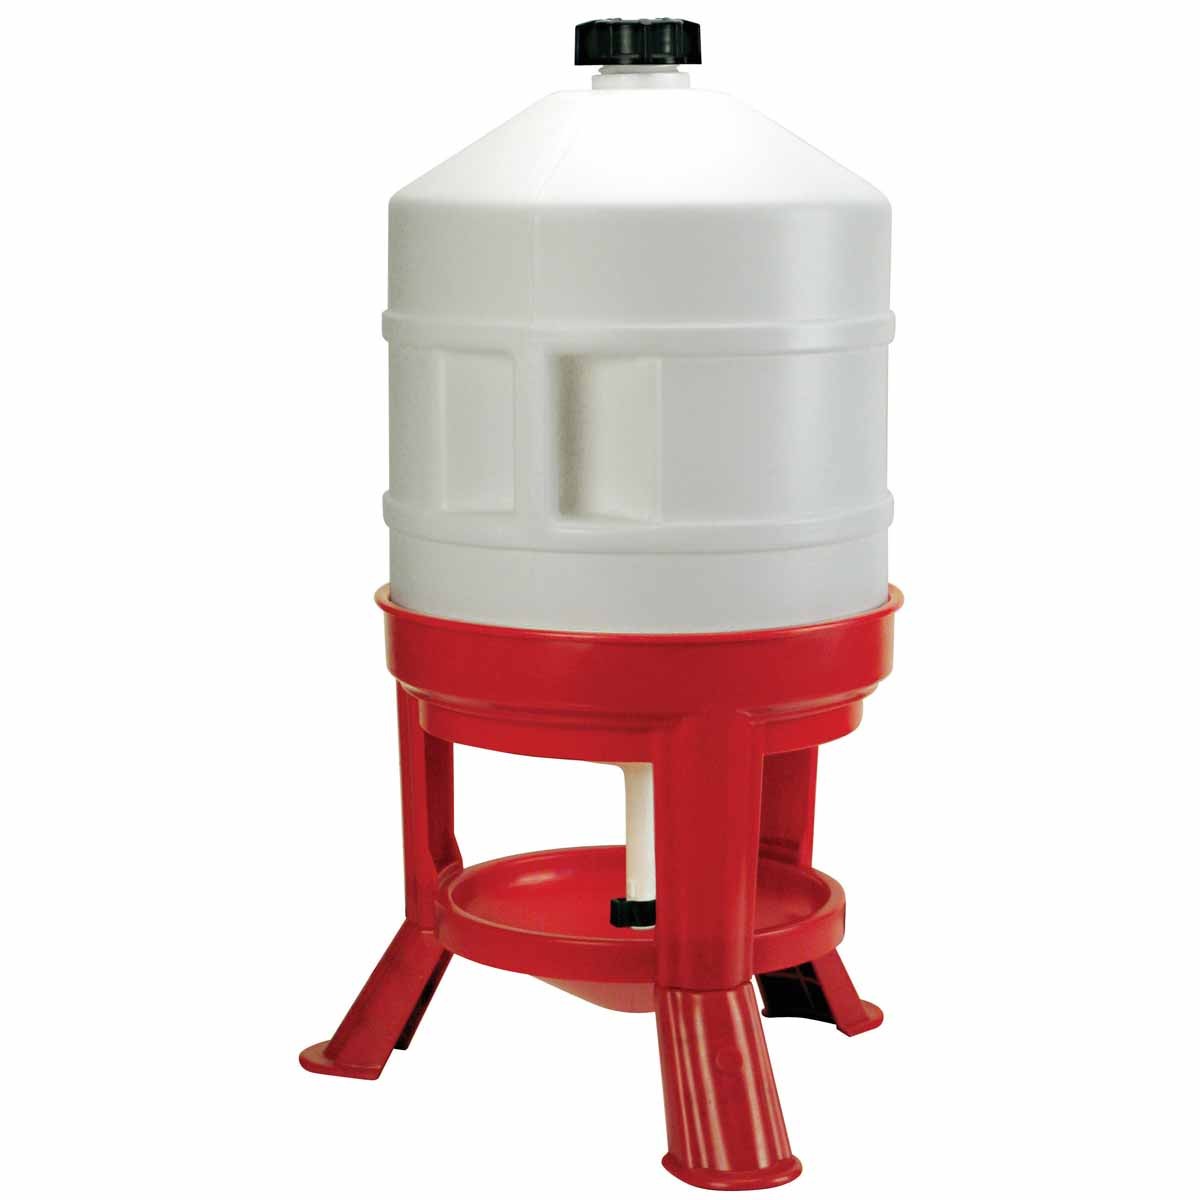 Poultry waterer 30 litre height: 70 cm